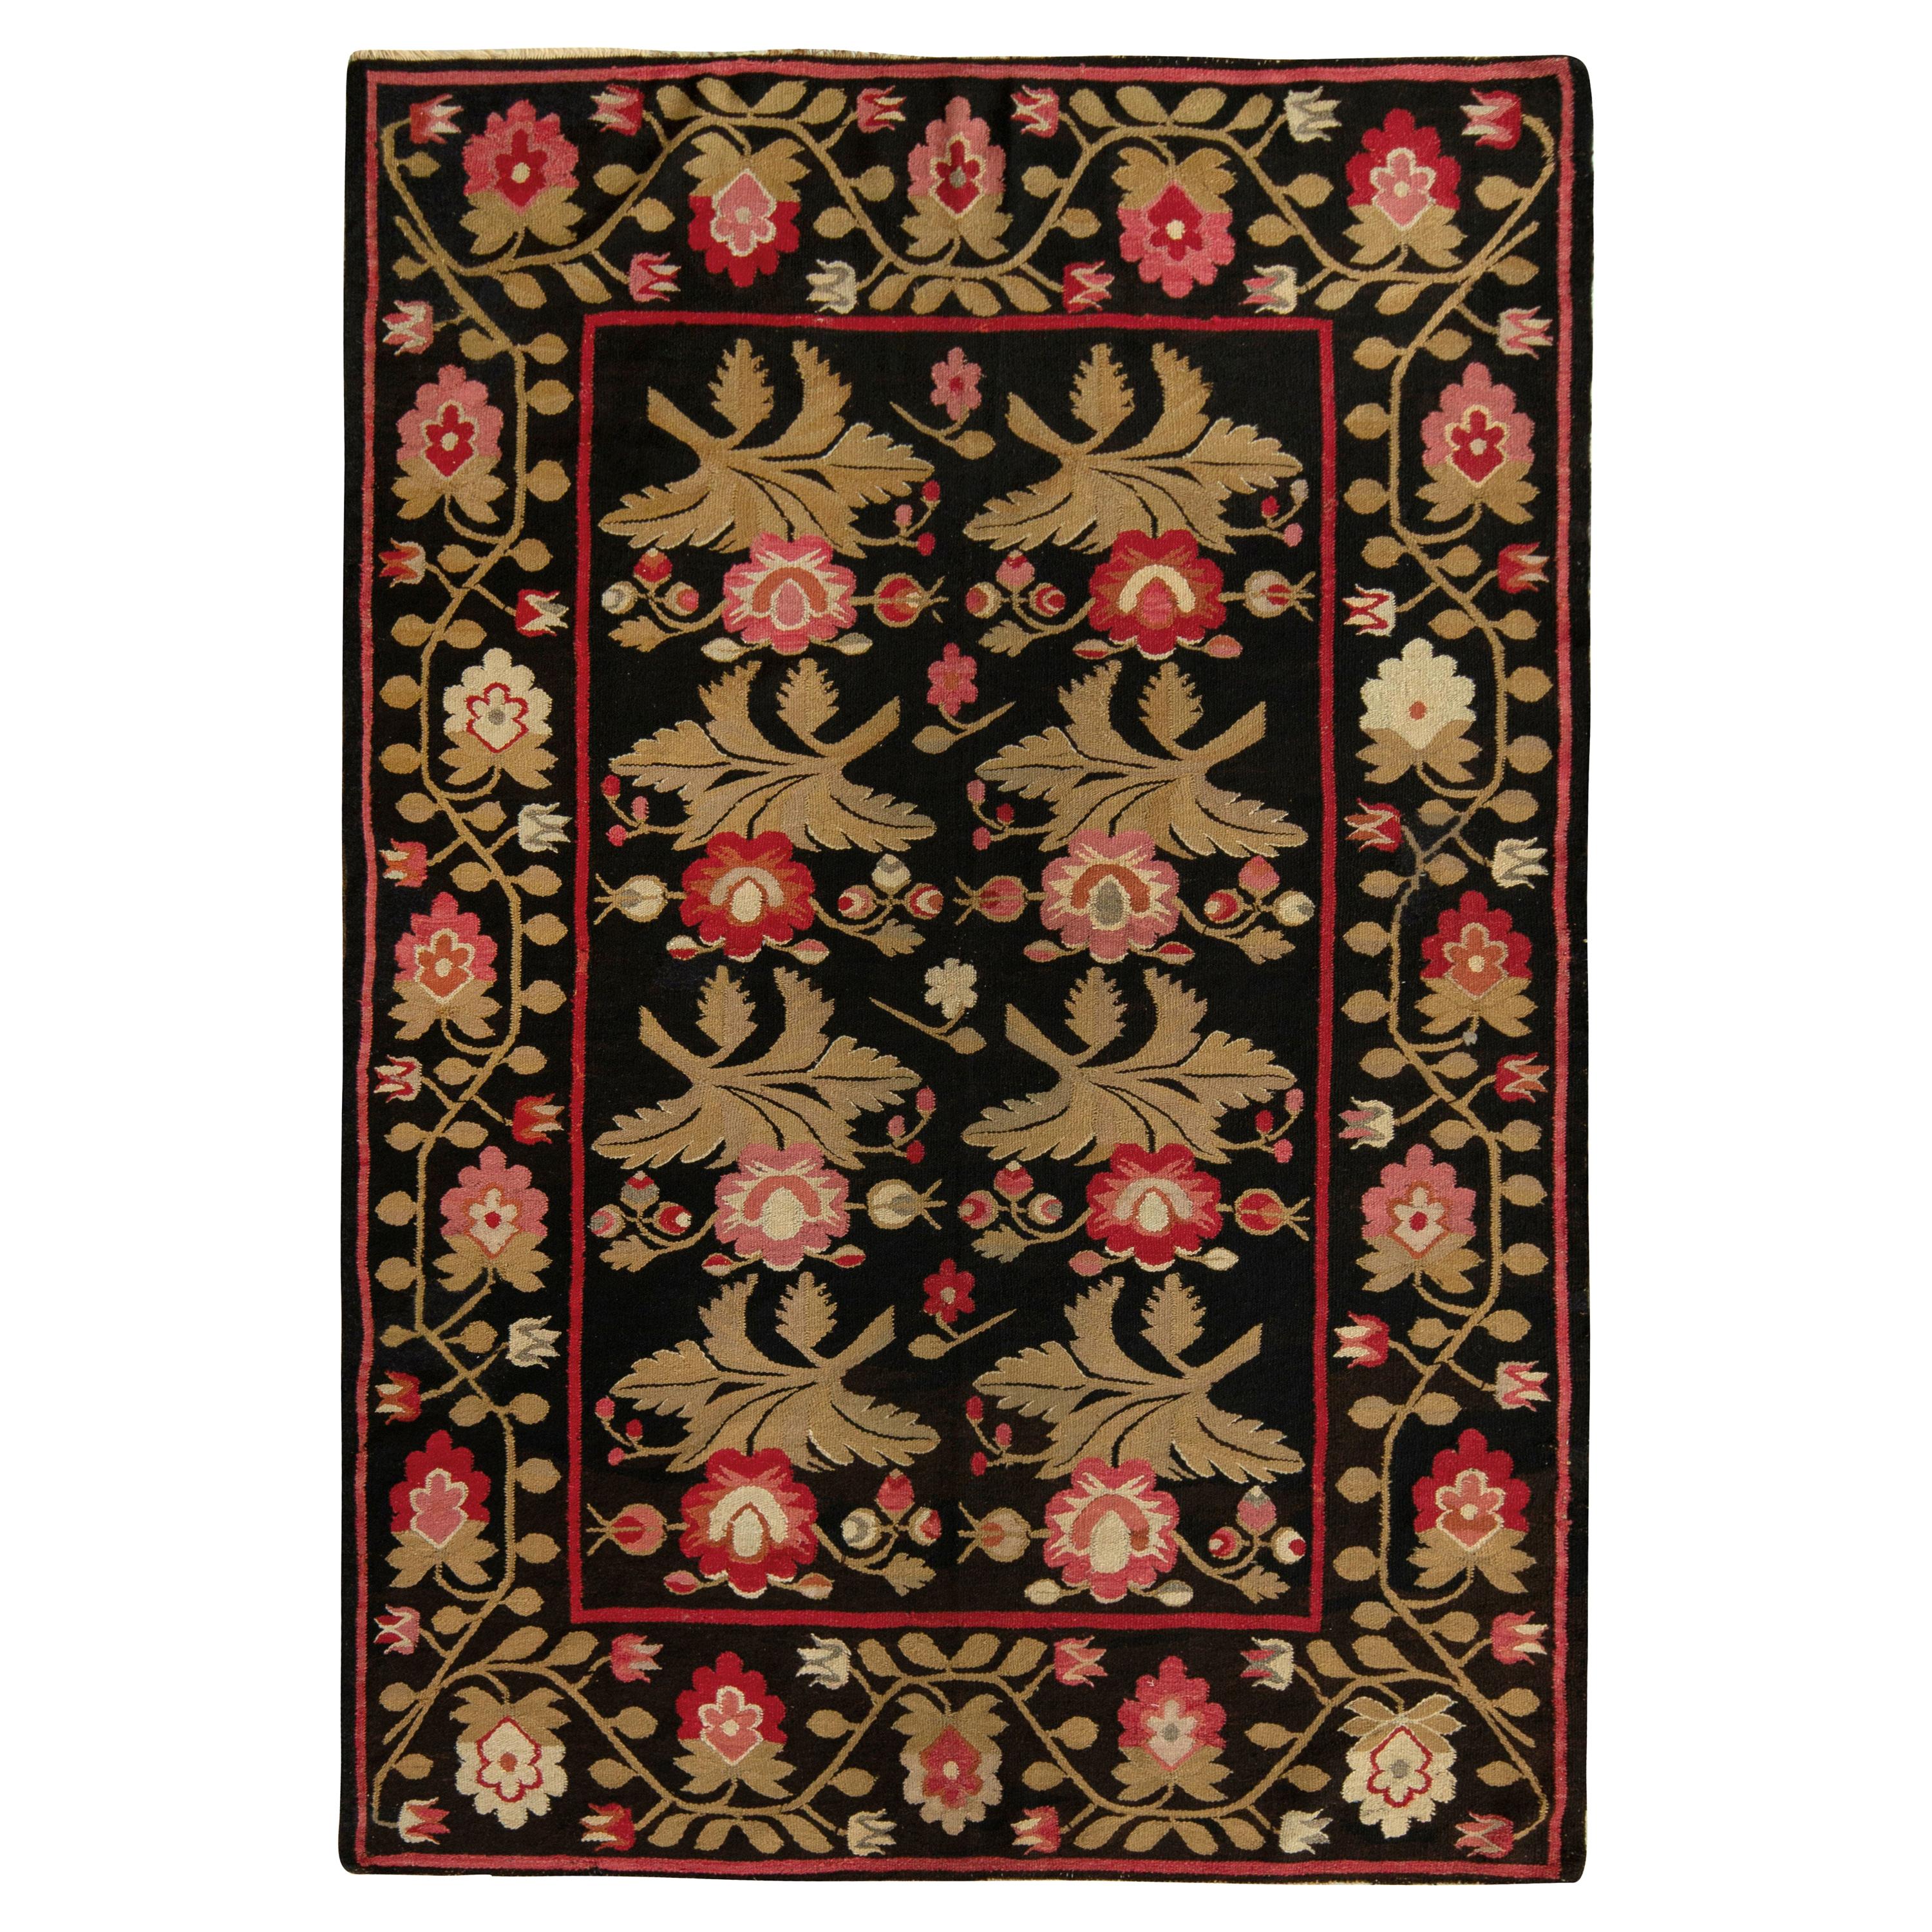 Antique Bessarabian Kilim Rug in Black with Red Floral Pattern by Rug & Kilim